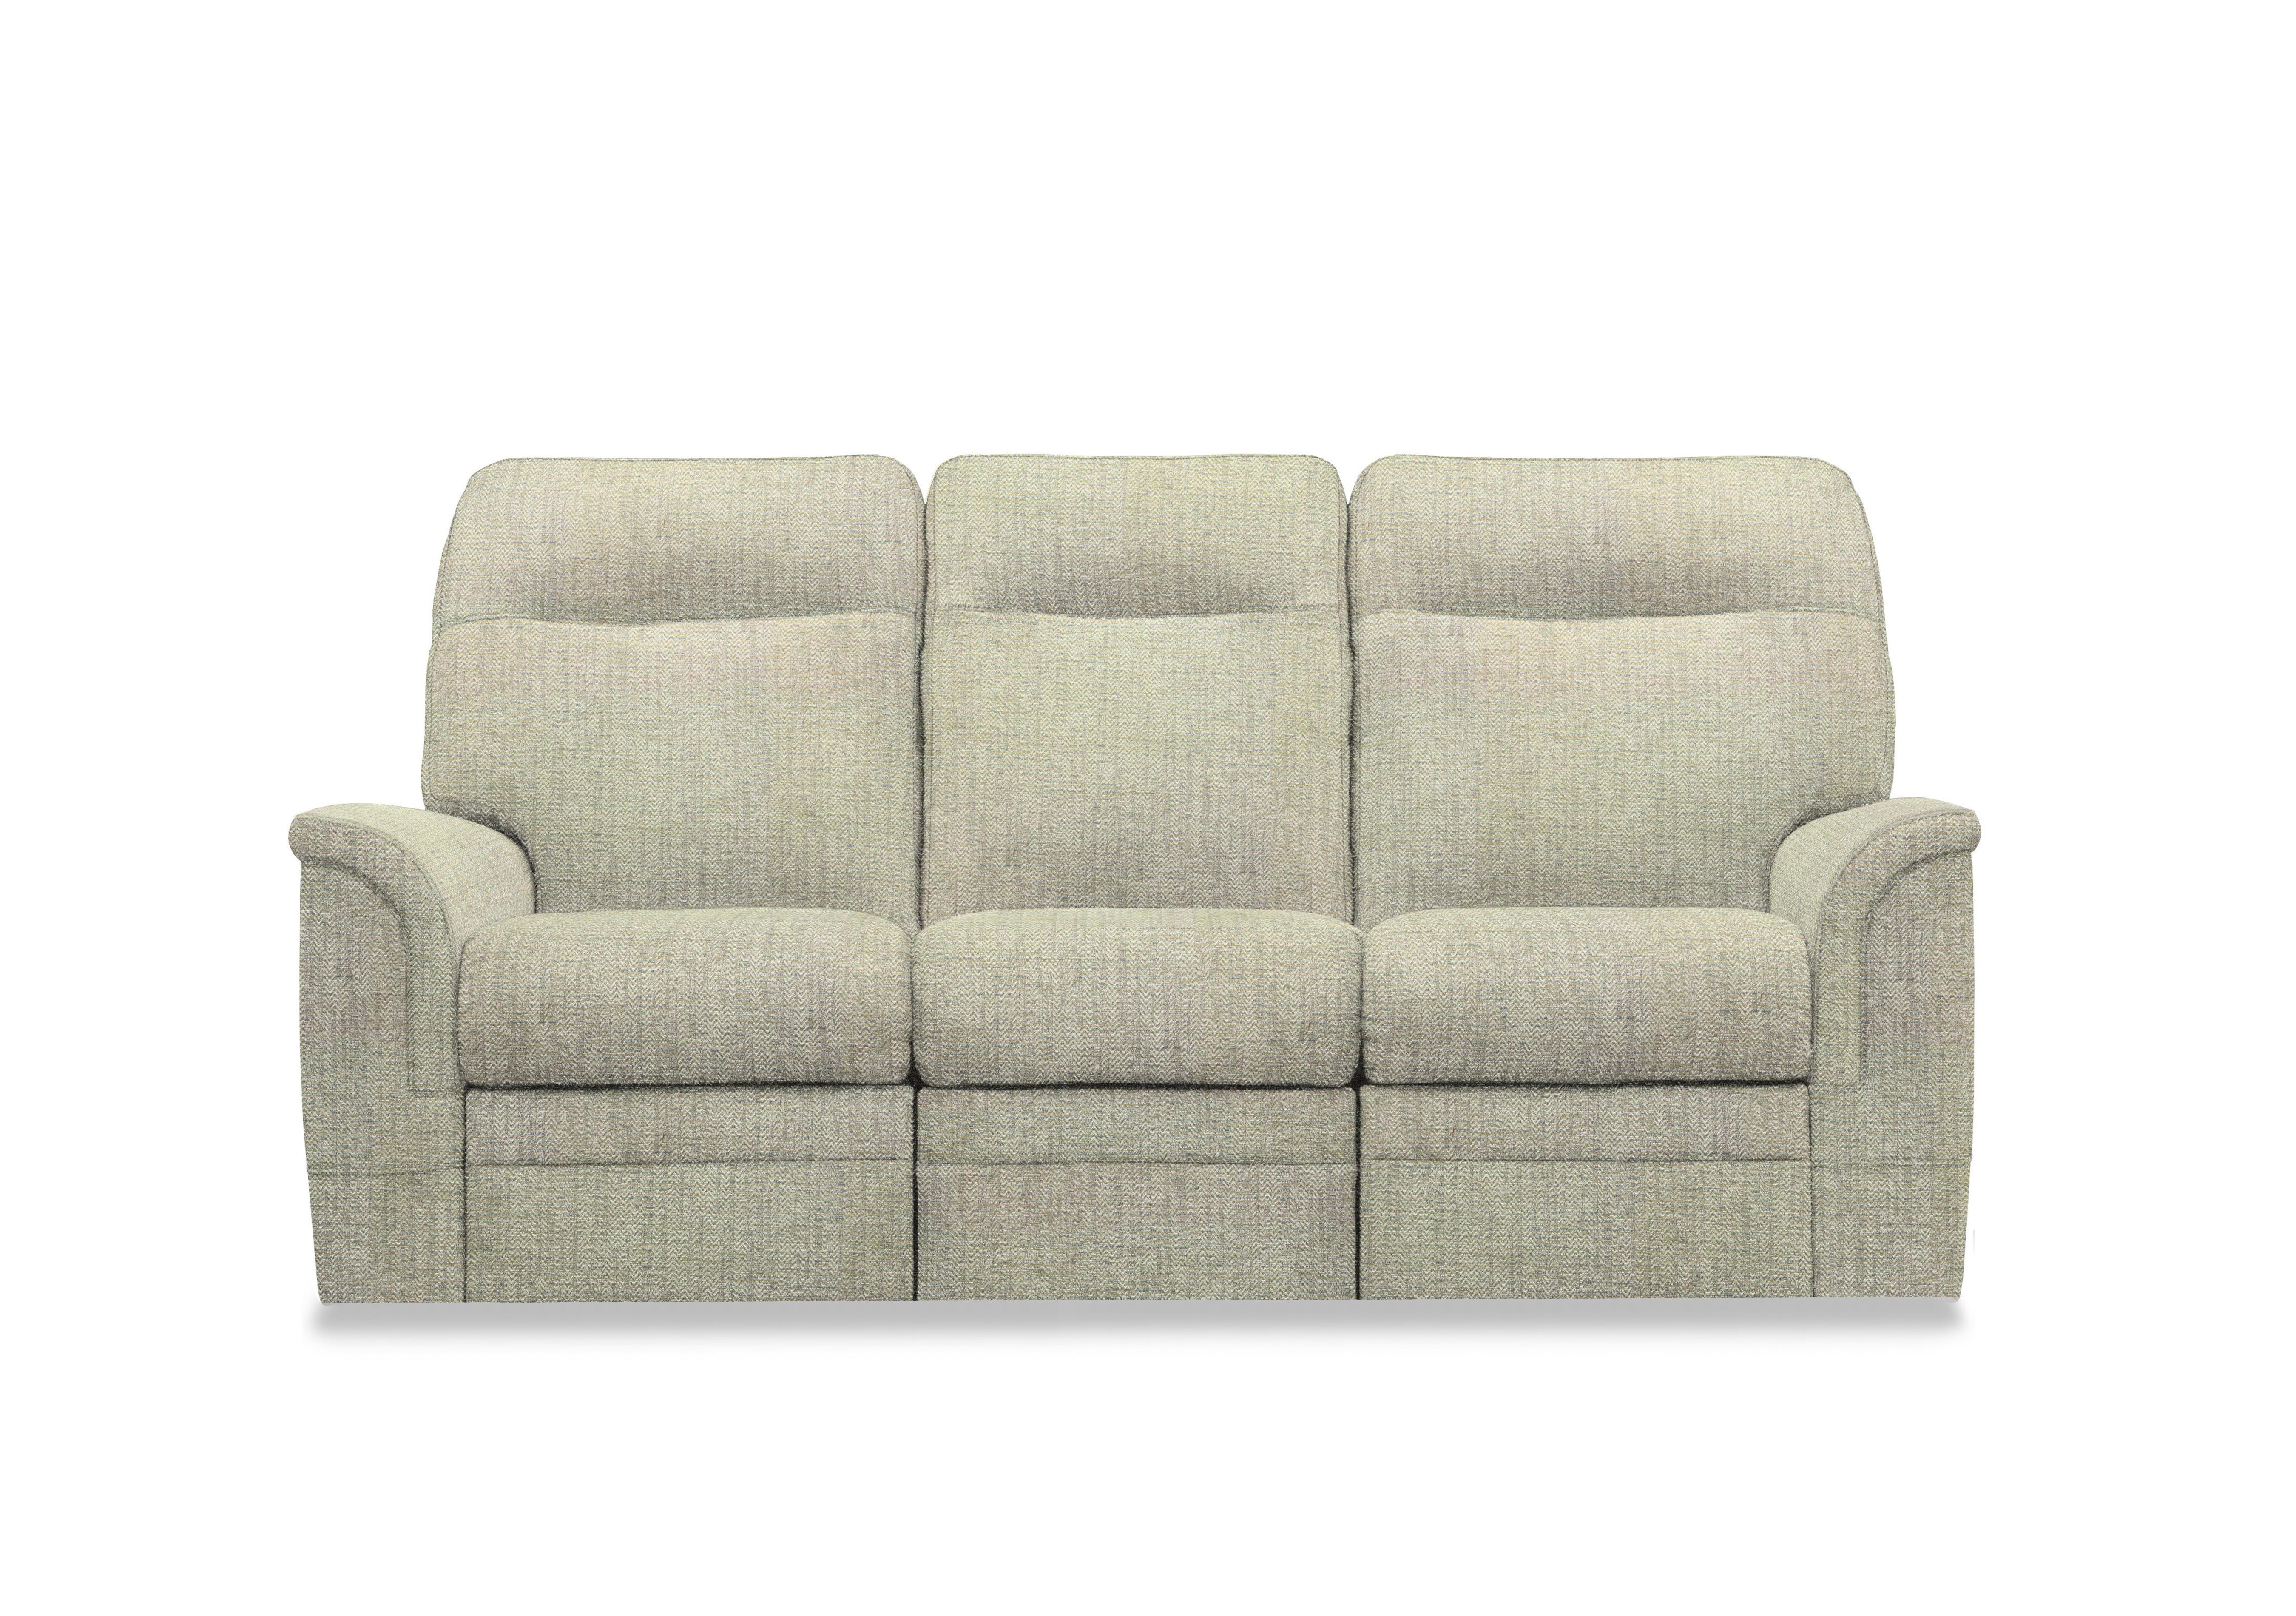 Hudson 23 Fabric 3 Seater Sofa in Cromwell Mint 001355-0069 on Furniture Village